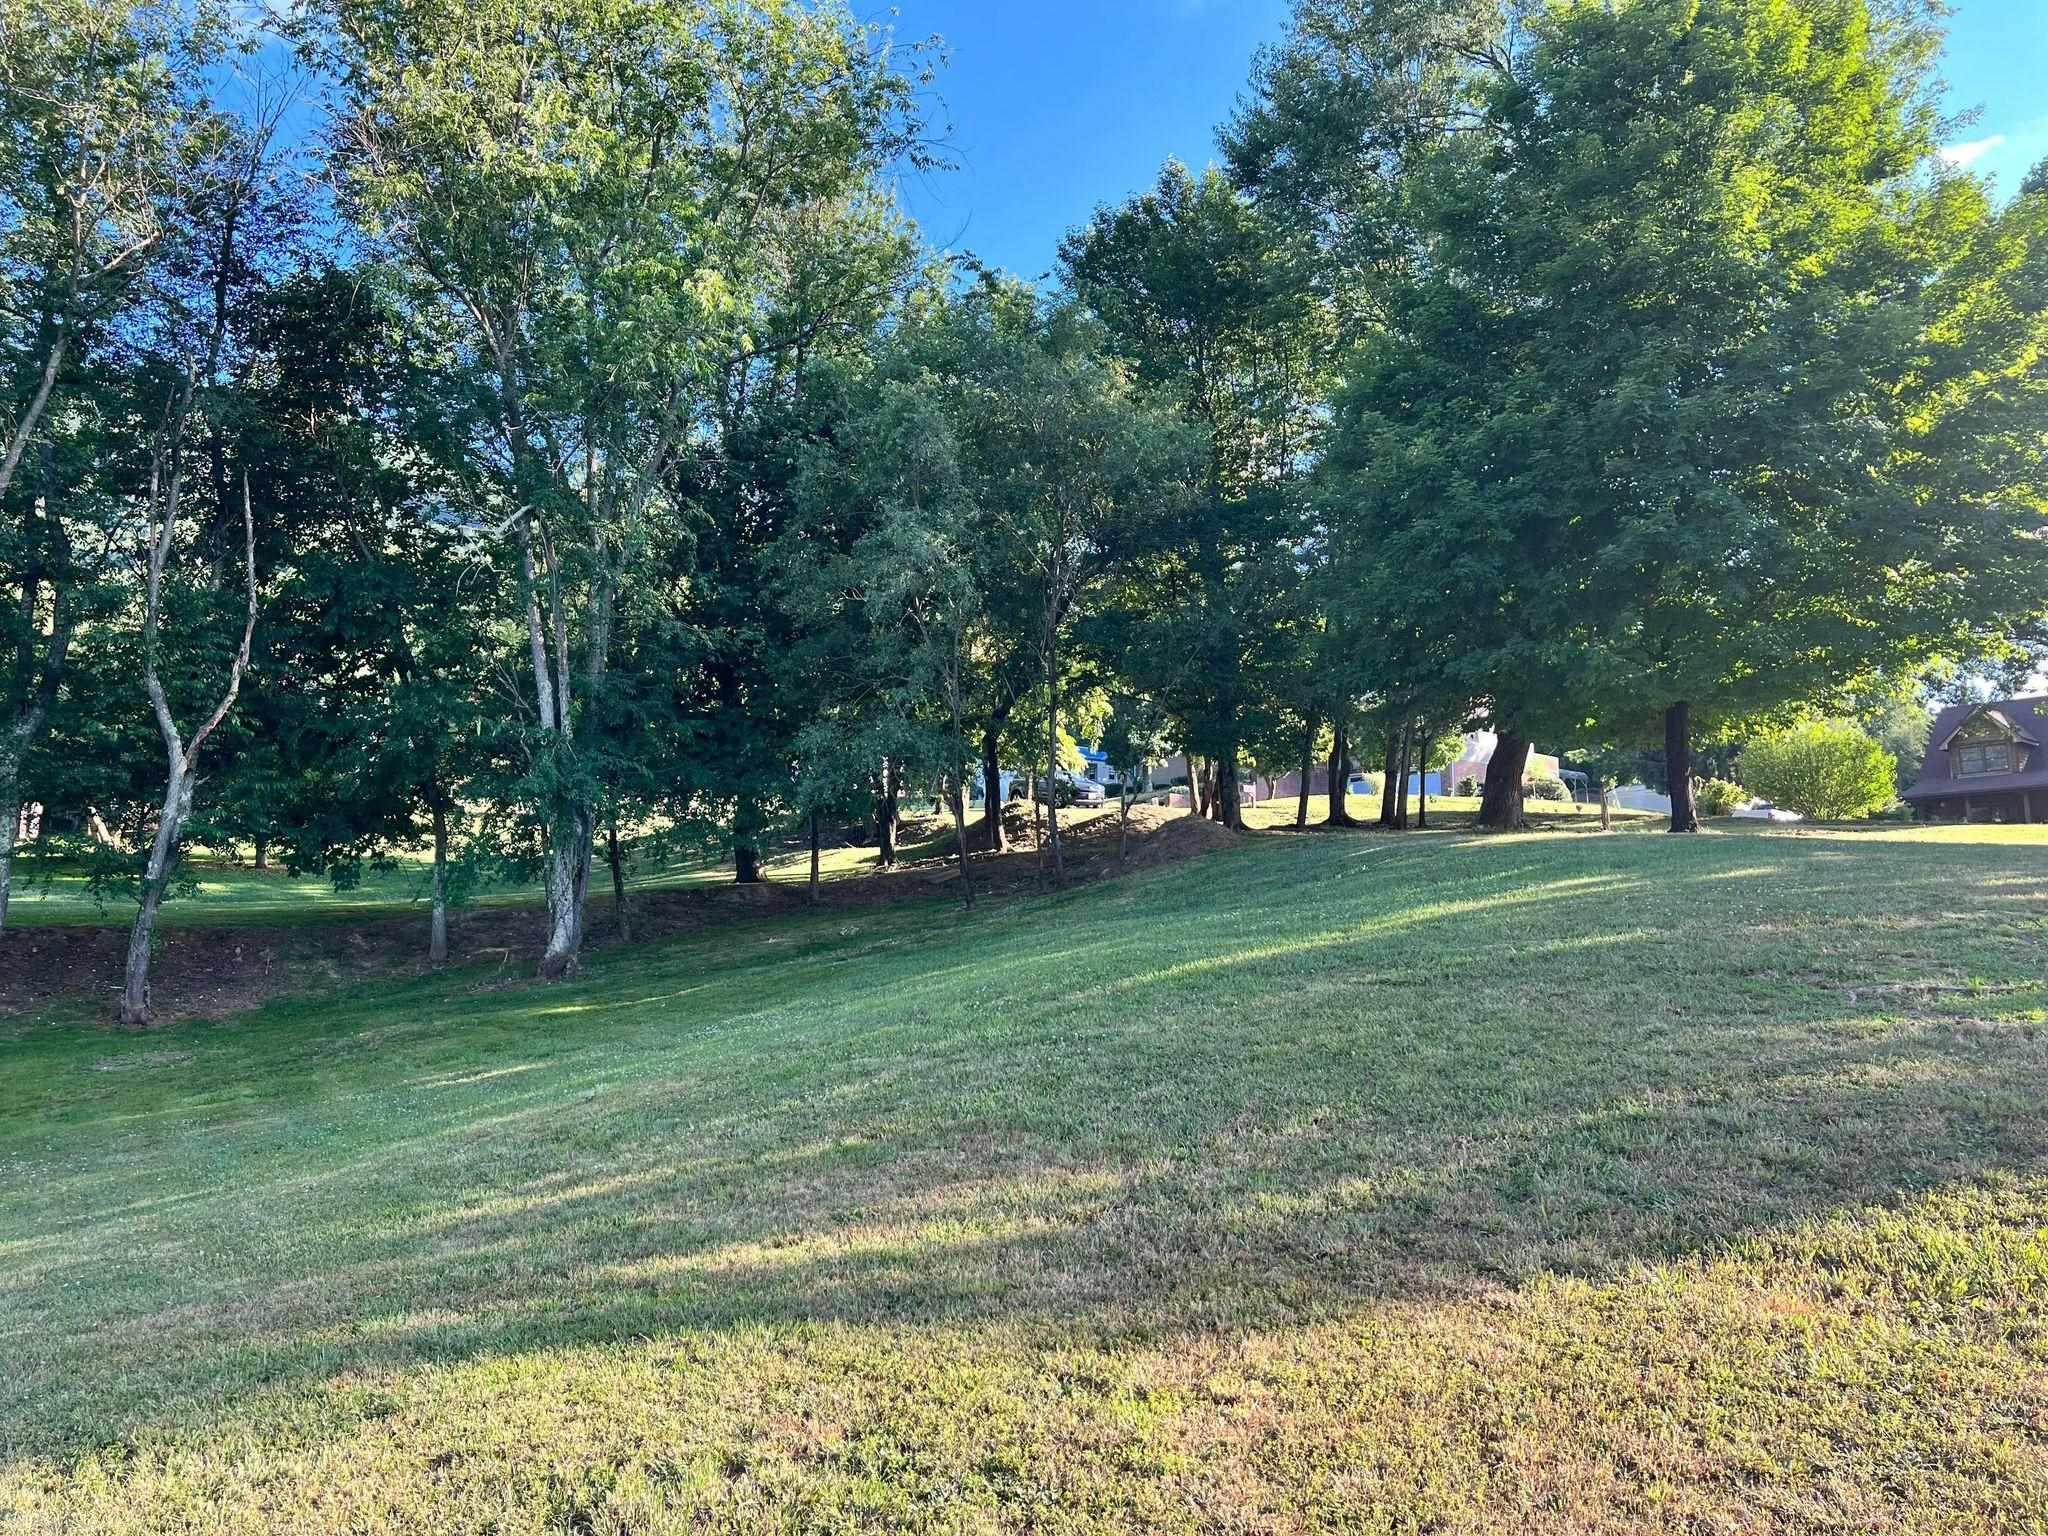 Two lots (38B-10-18 and 38B-10-19) located in the beautiful Sentinel Hills neighborhood, perfect for building your dream home! Surrounded by mountain views and minutes from 460, don't miss out on this opportunity! Public sewer and water available. Tax info (2021) is for both lots.